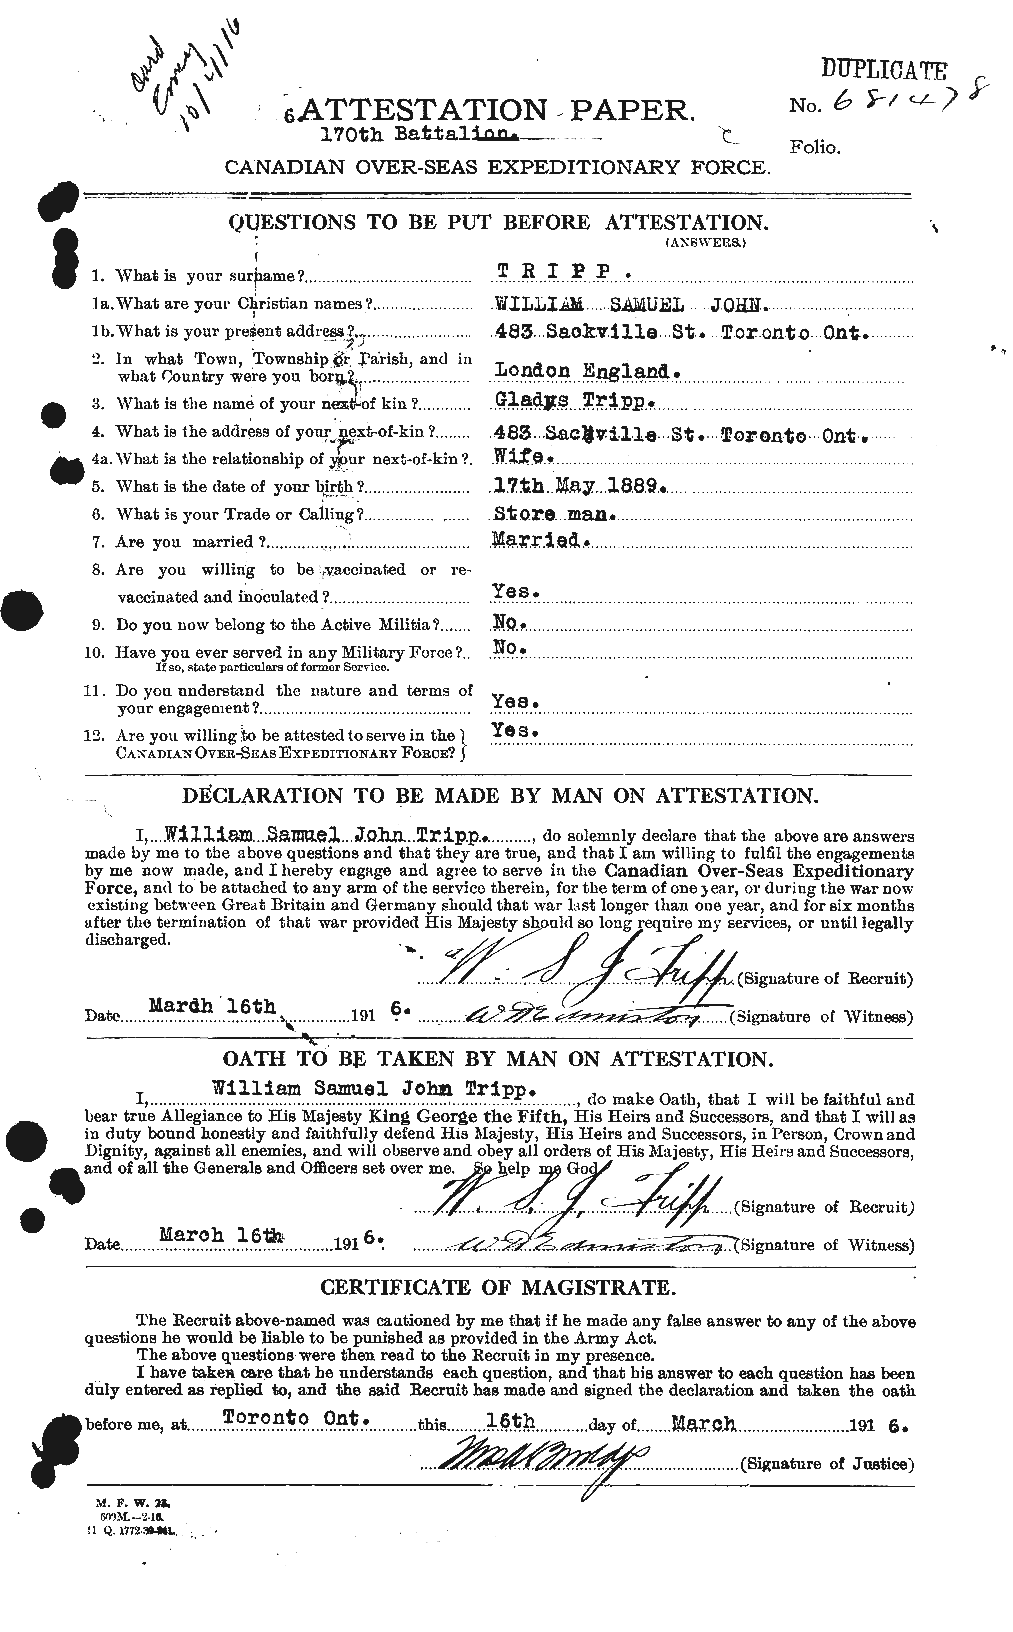 Personnel Records of the First World War - CEF 640127a